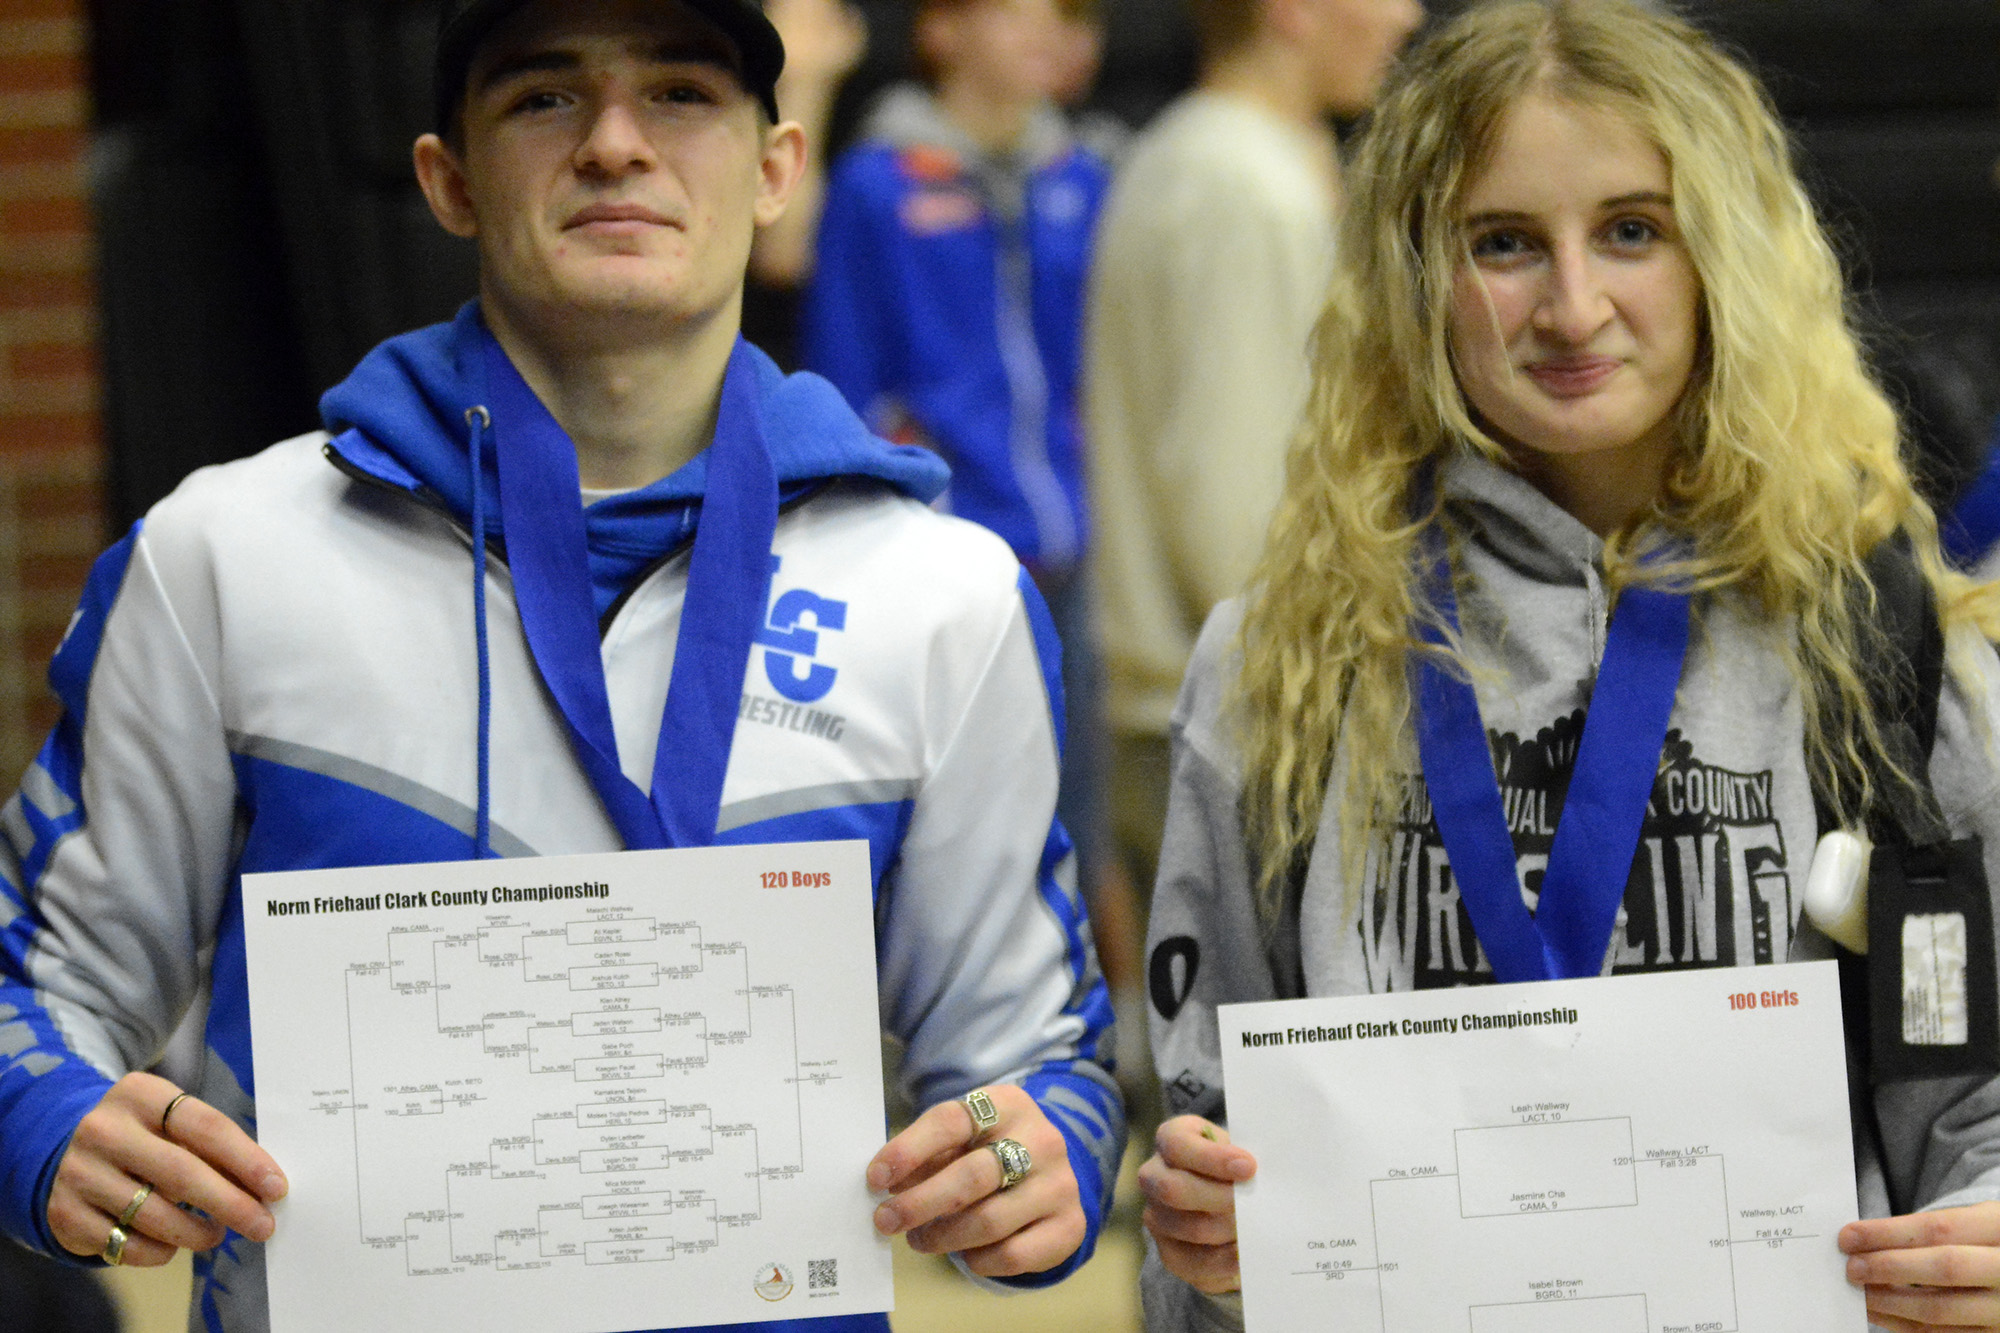 Malachi Wallway and Leah Wallway pose with their brackets after becoming the third brother-sister duo to win Clark County championships in the same year at the Clark County Wrestling Championships at Union High School on Saturday, Jan.